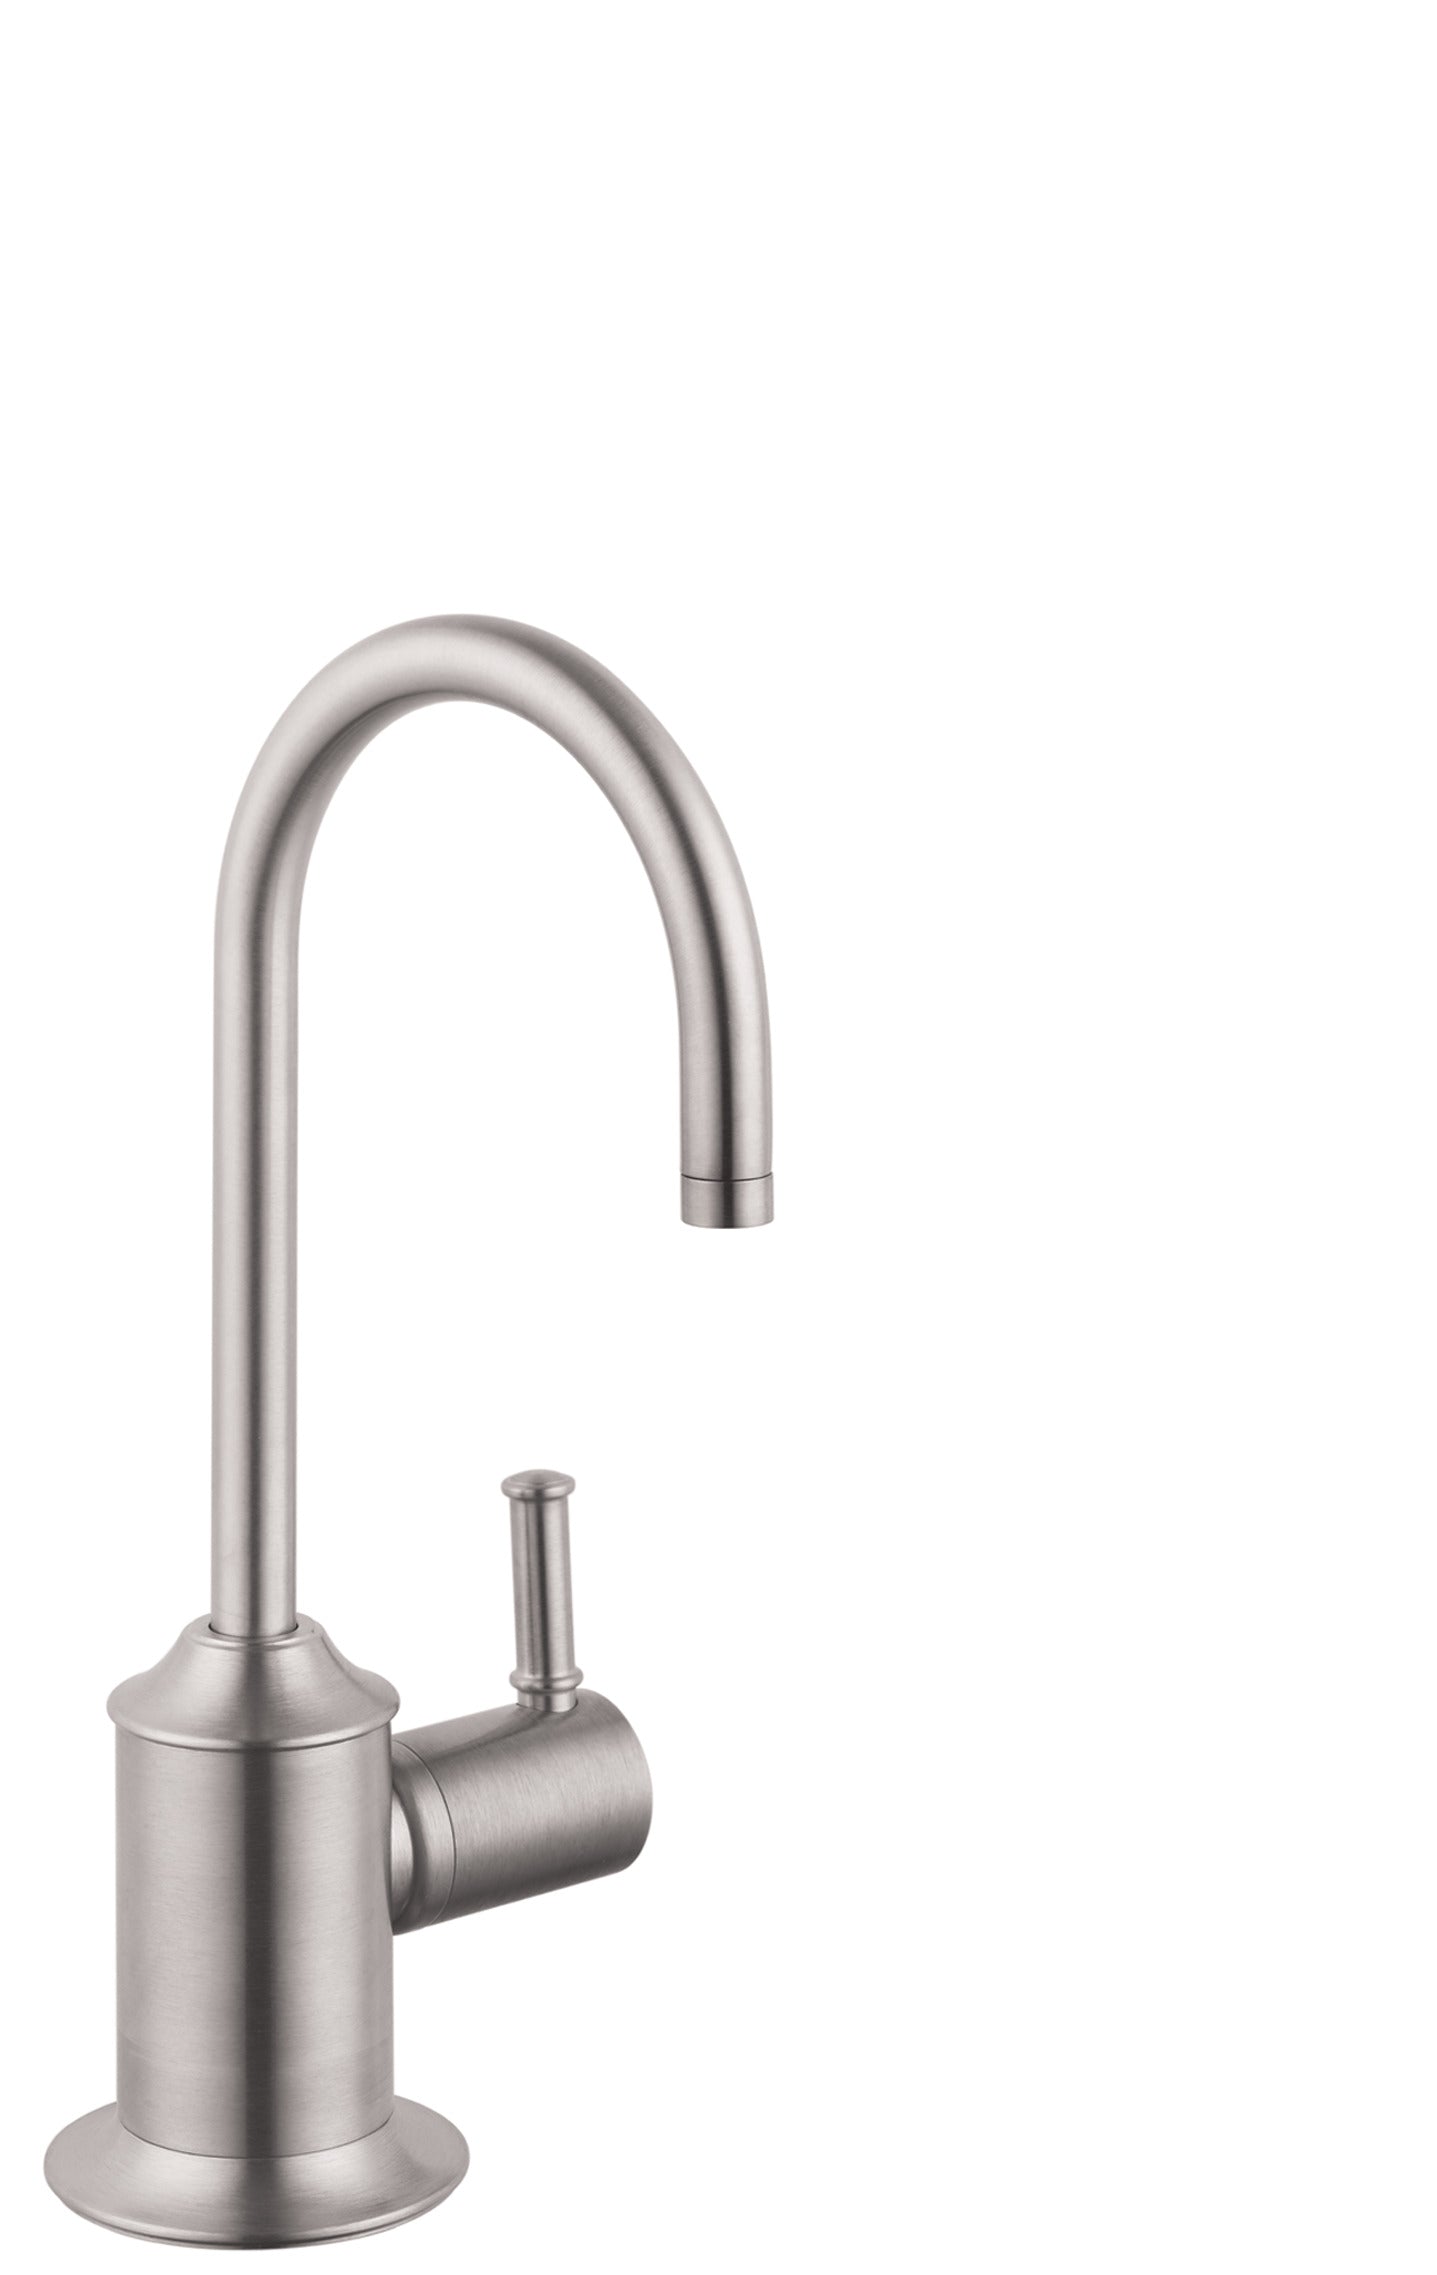 HANSGROHE 04302800 Stainless Steel Optic Talis C Classic Kitchen Faucet 1.5 GPM